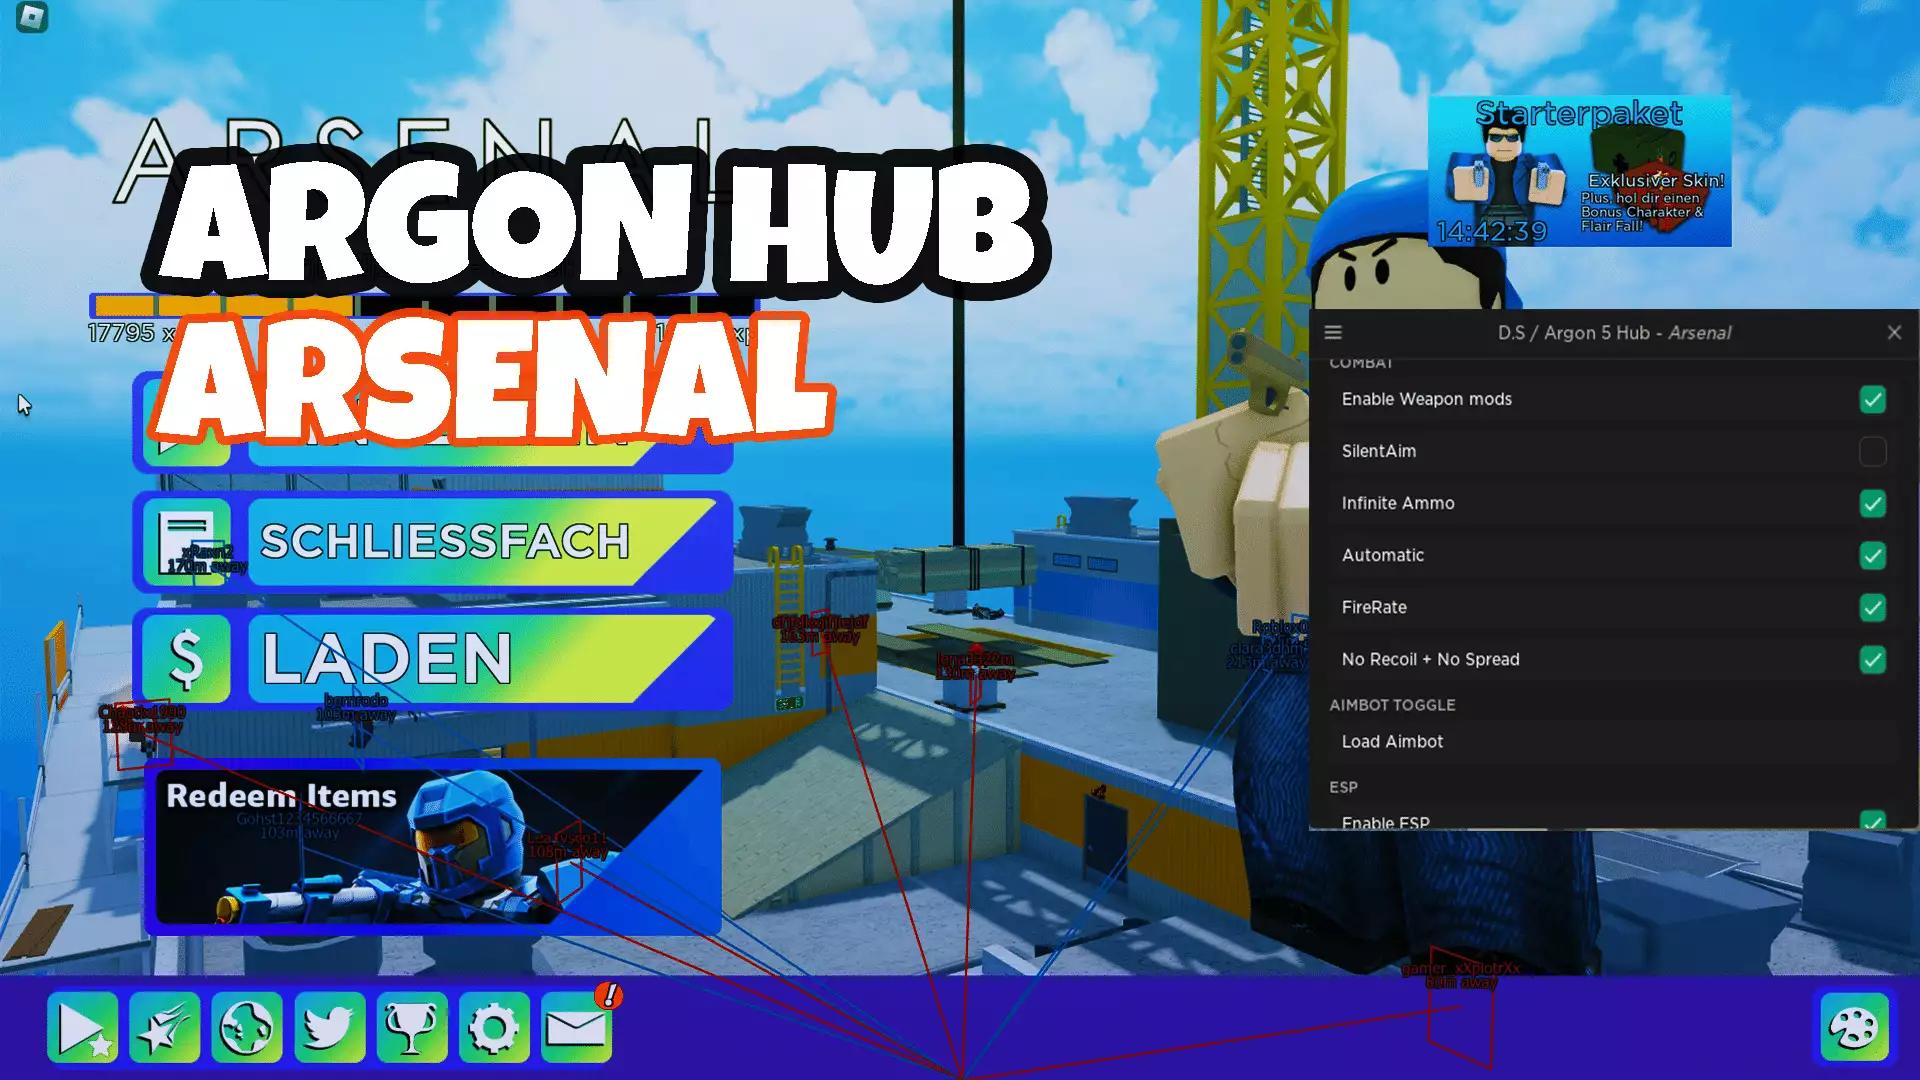 Preview of Argon Hub  -  Arsenal (updated)